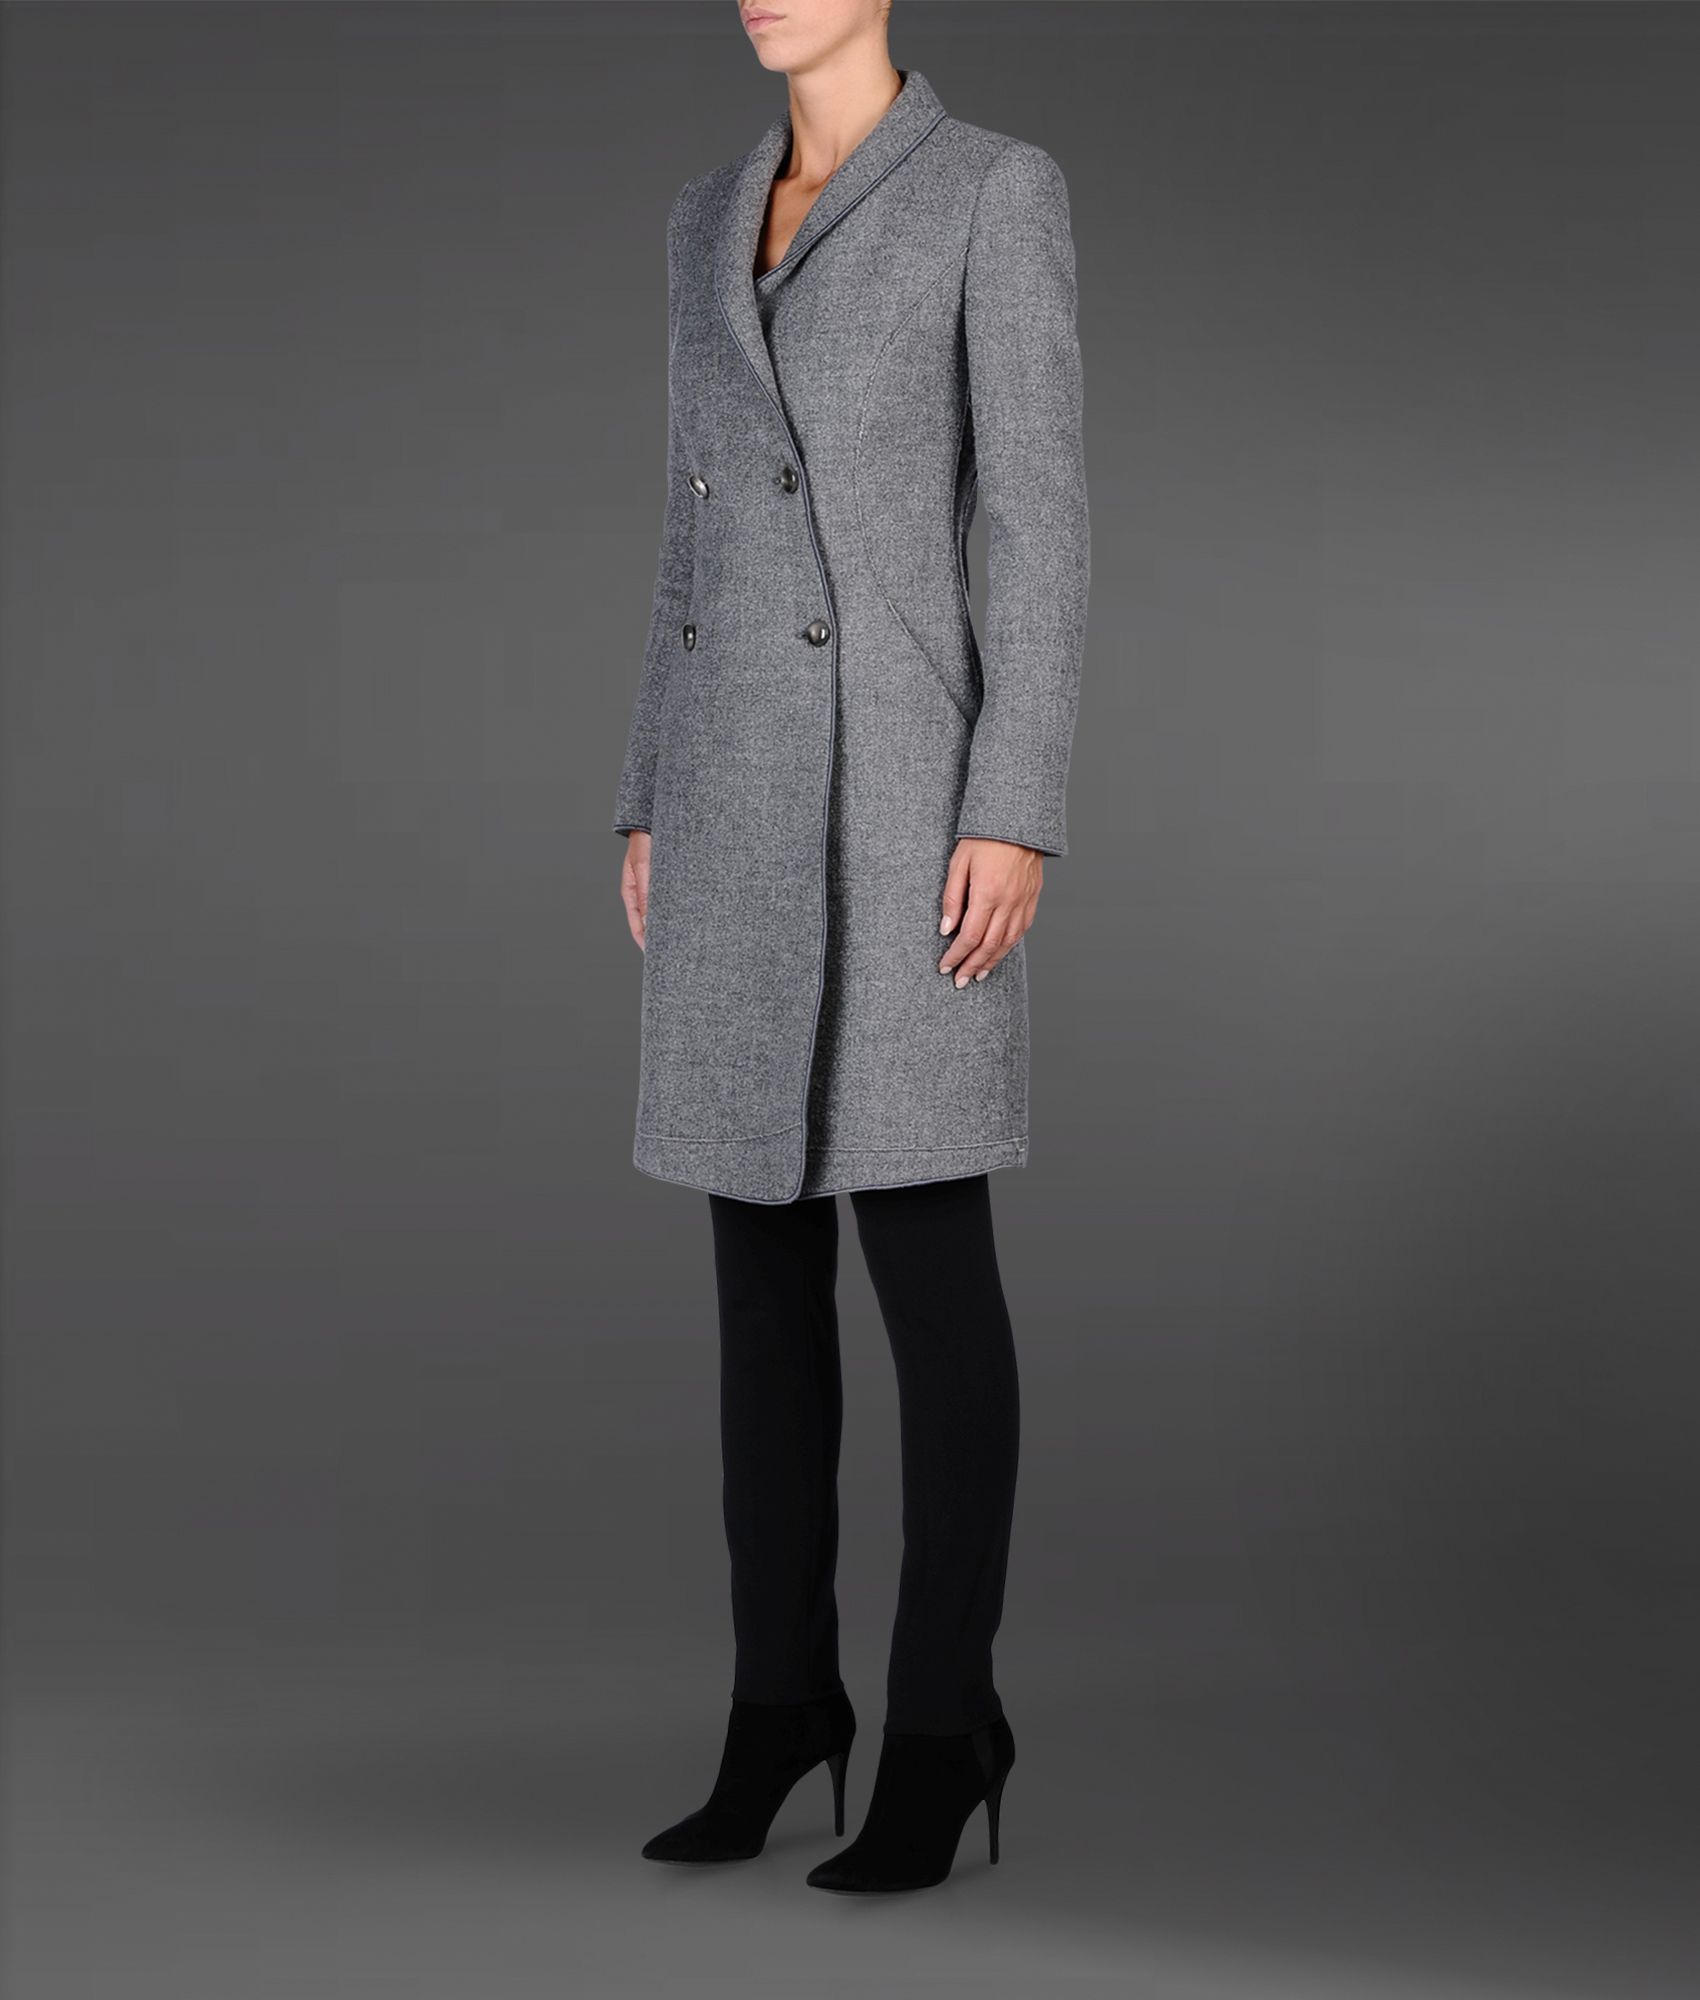 Emporio Armani Double Breasted Coat in Boiled Wool in Grey (Gray) - Lyst